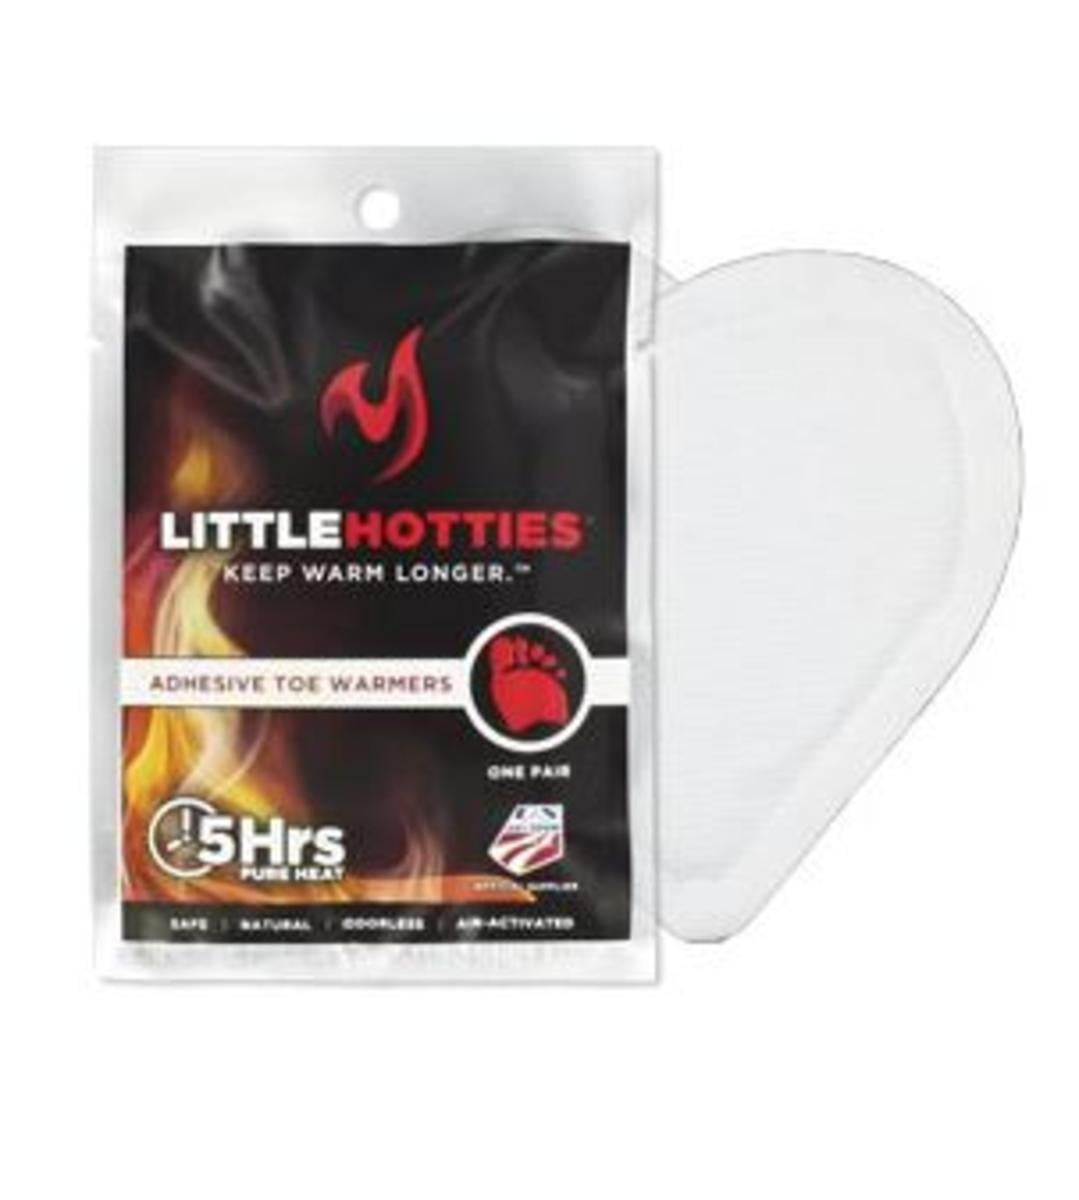 Little Hotties Adhesive Toe Warmers 5 Hours Pure Heat Safe Natural Wholesale